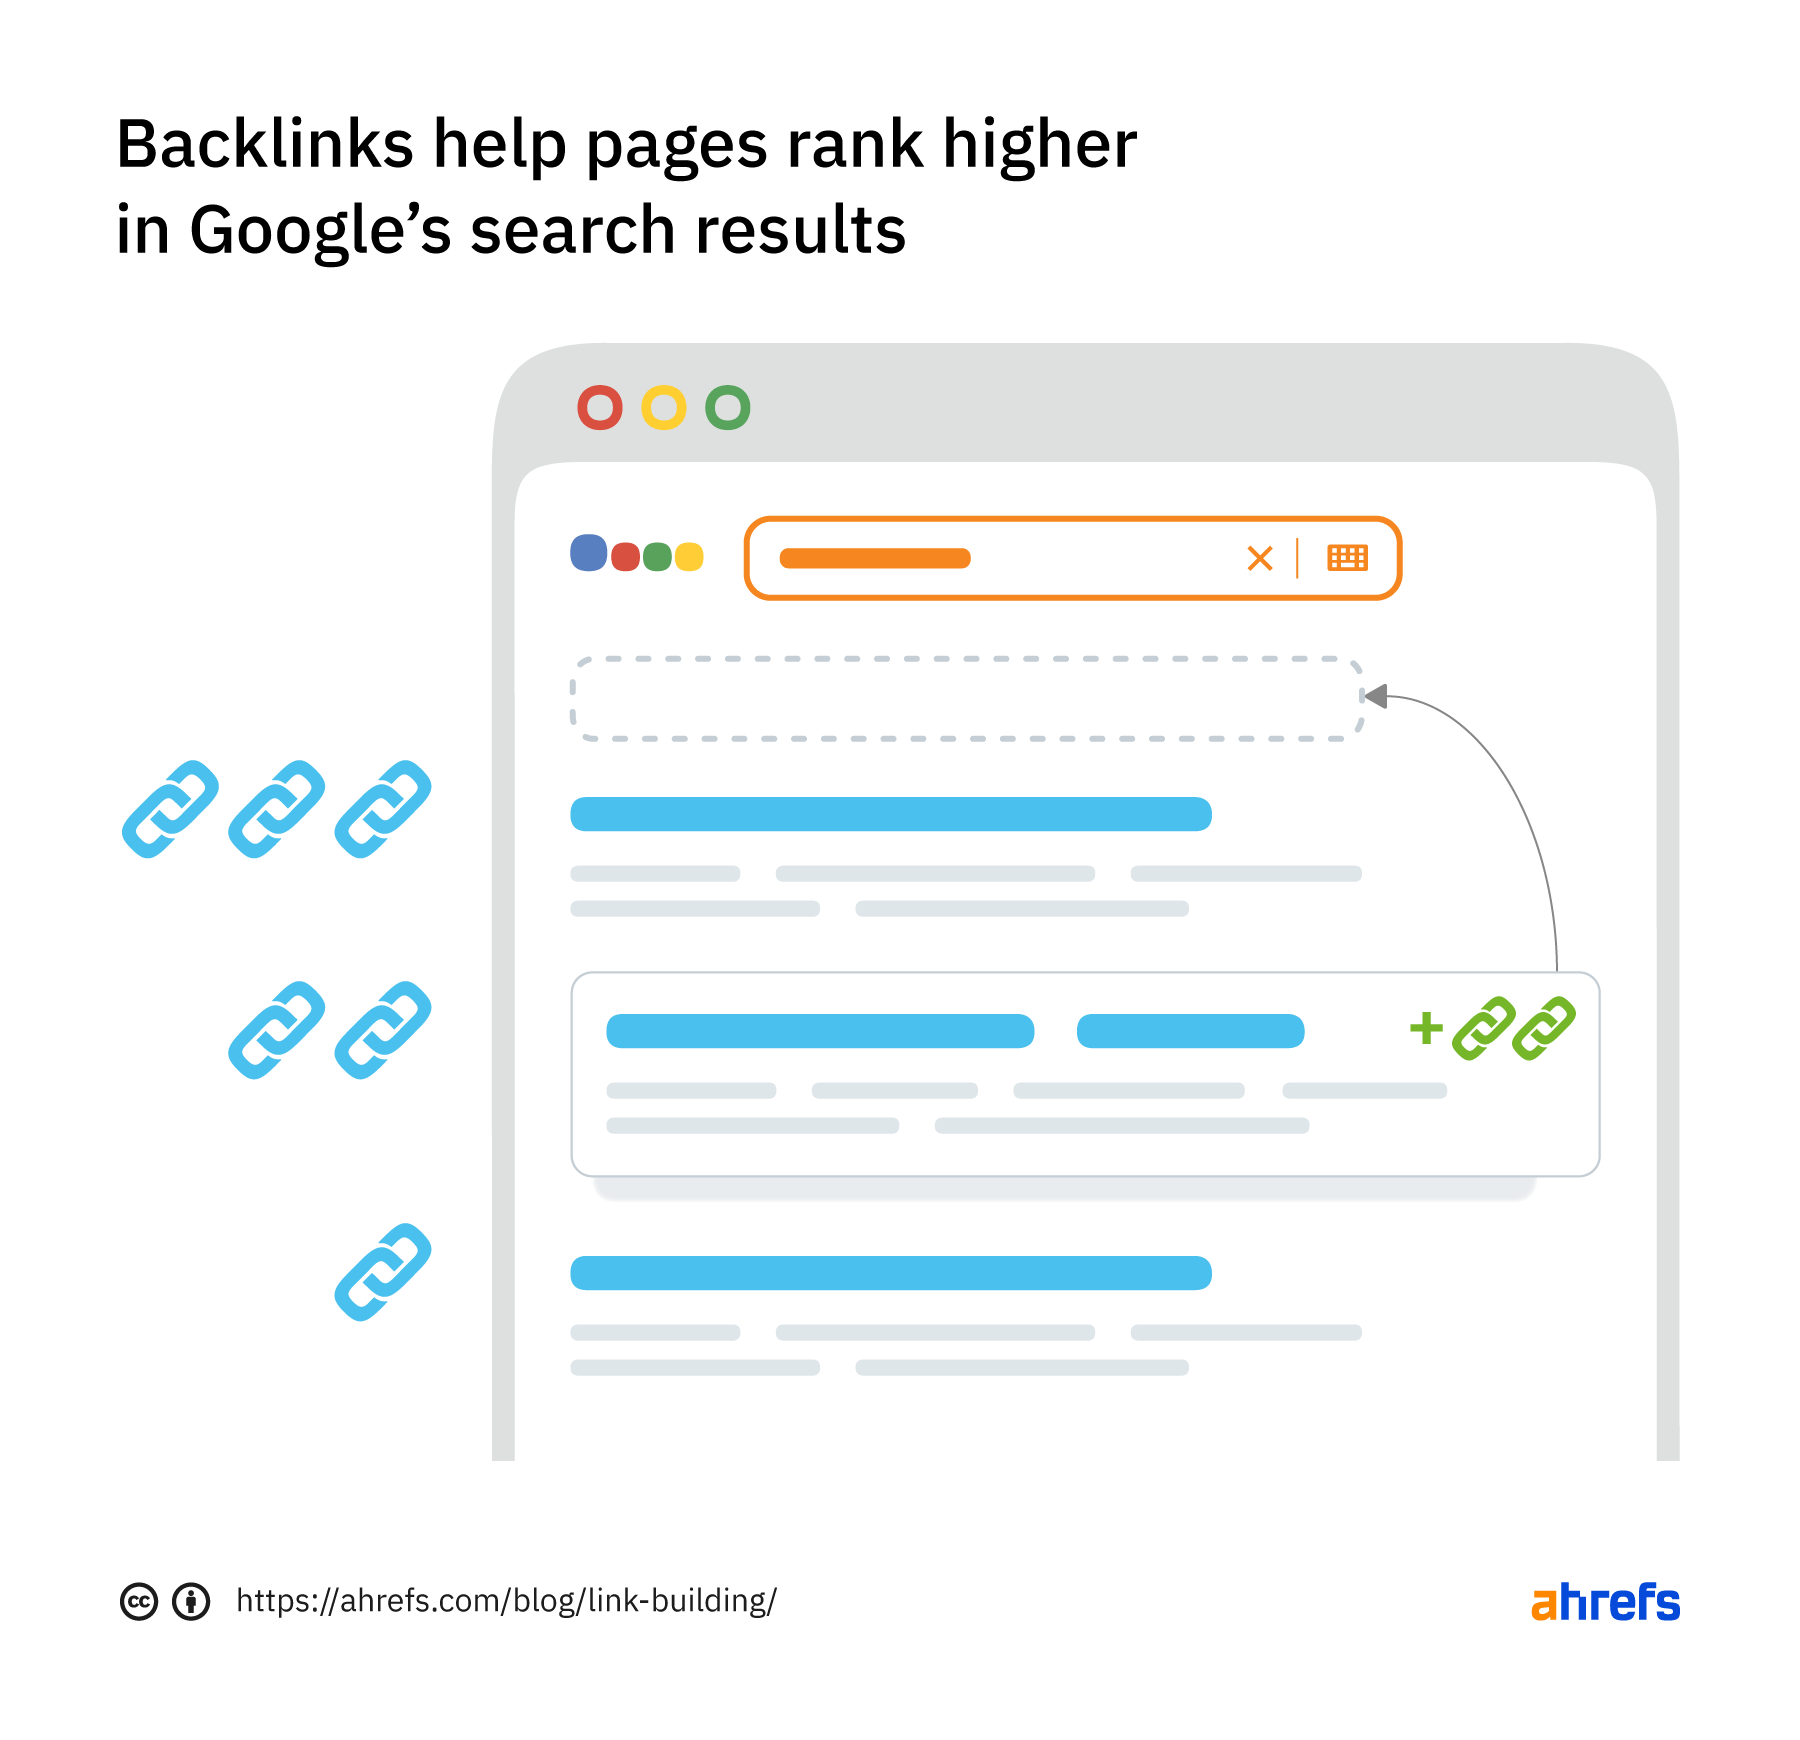 Backlinks help pages rank higher in Google SERPs